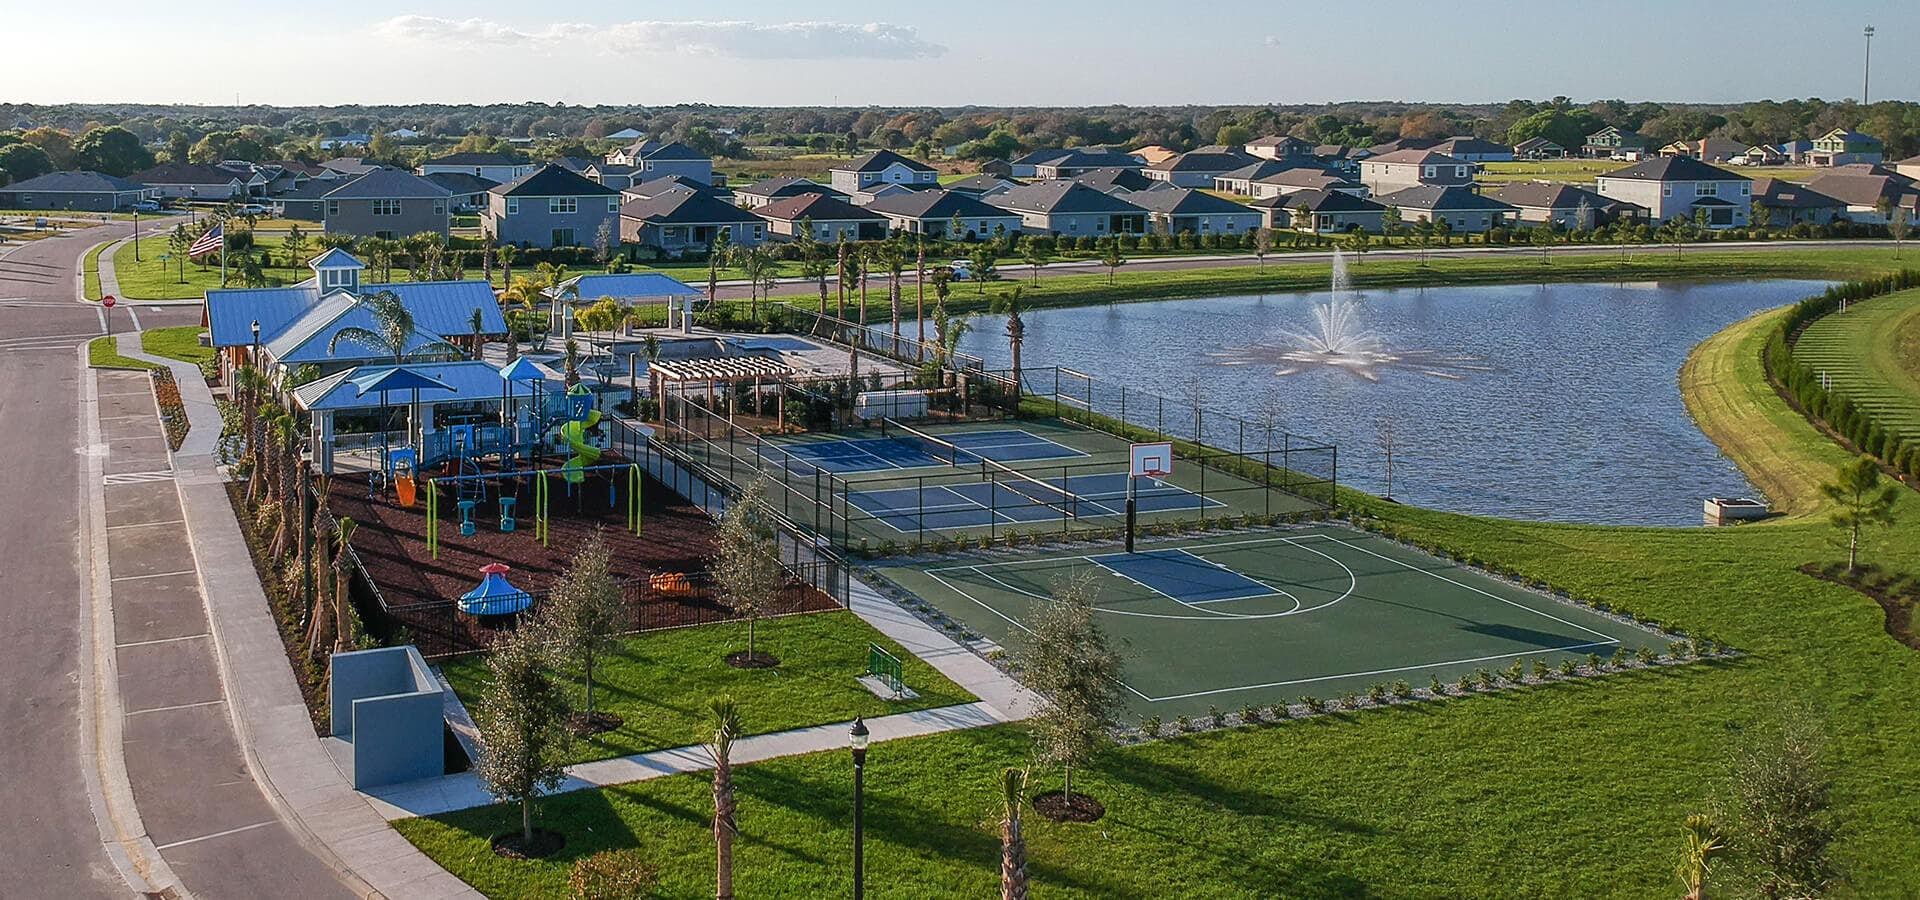 Lakefront amenity center in Parrish, Florida